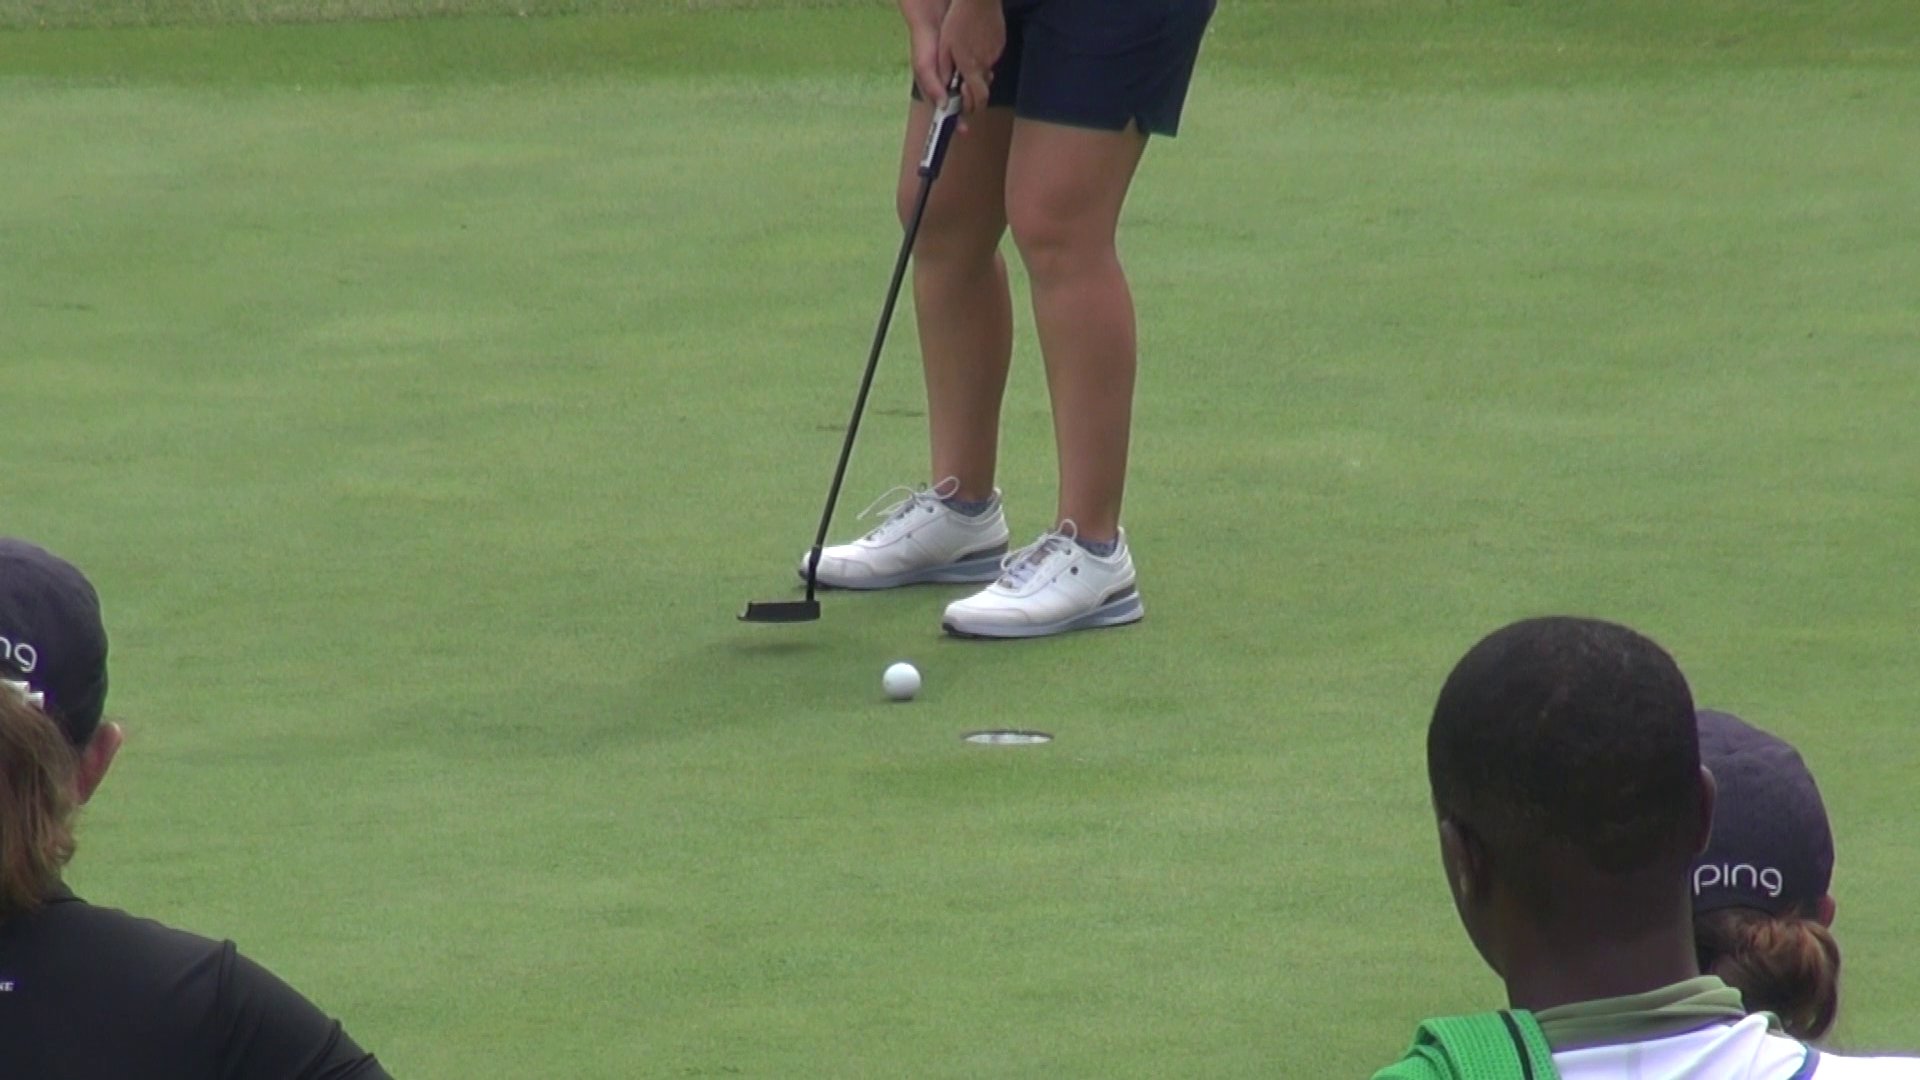 Volunteers are still needed this weekend for the Walmart Northwest Arkansas LPGA Championship in Rogers.